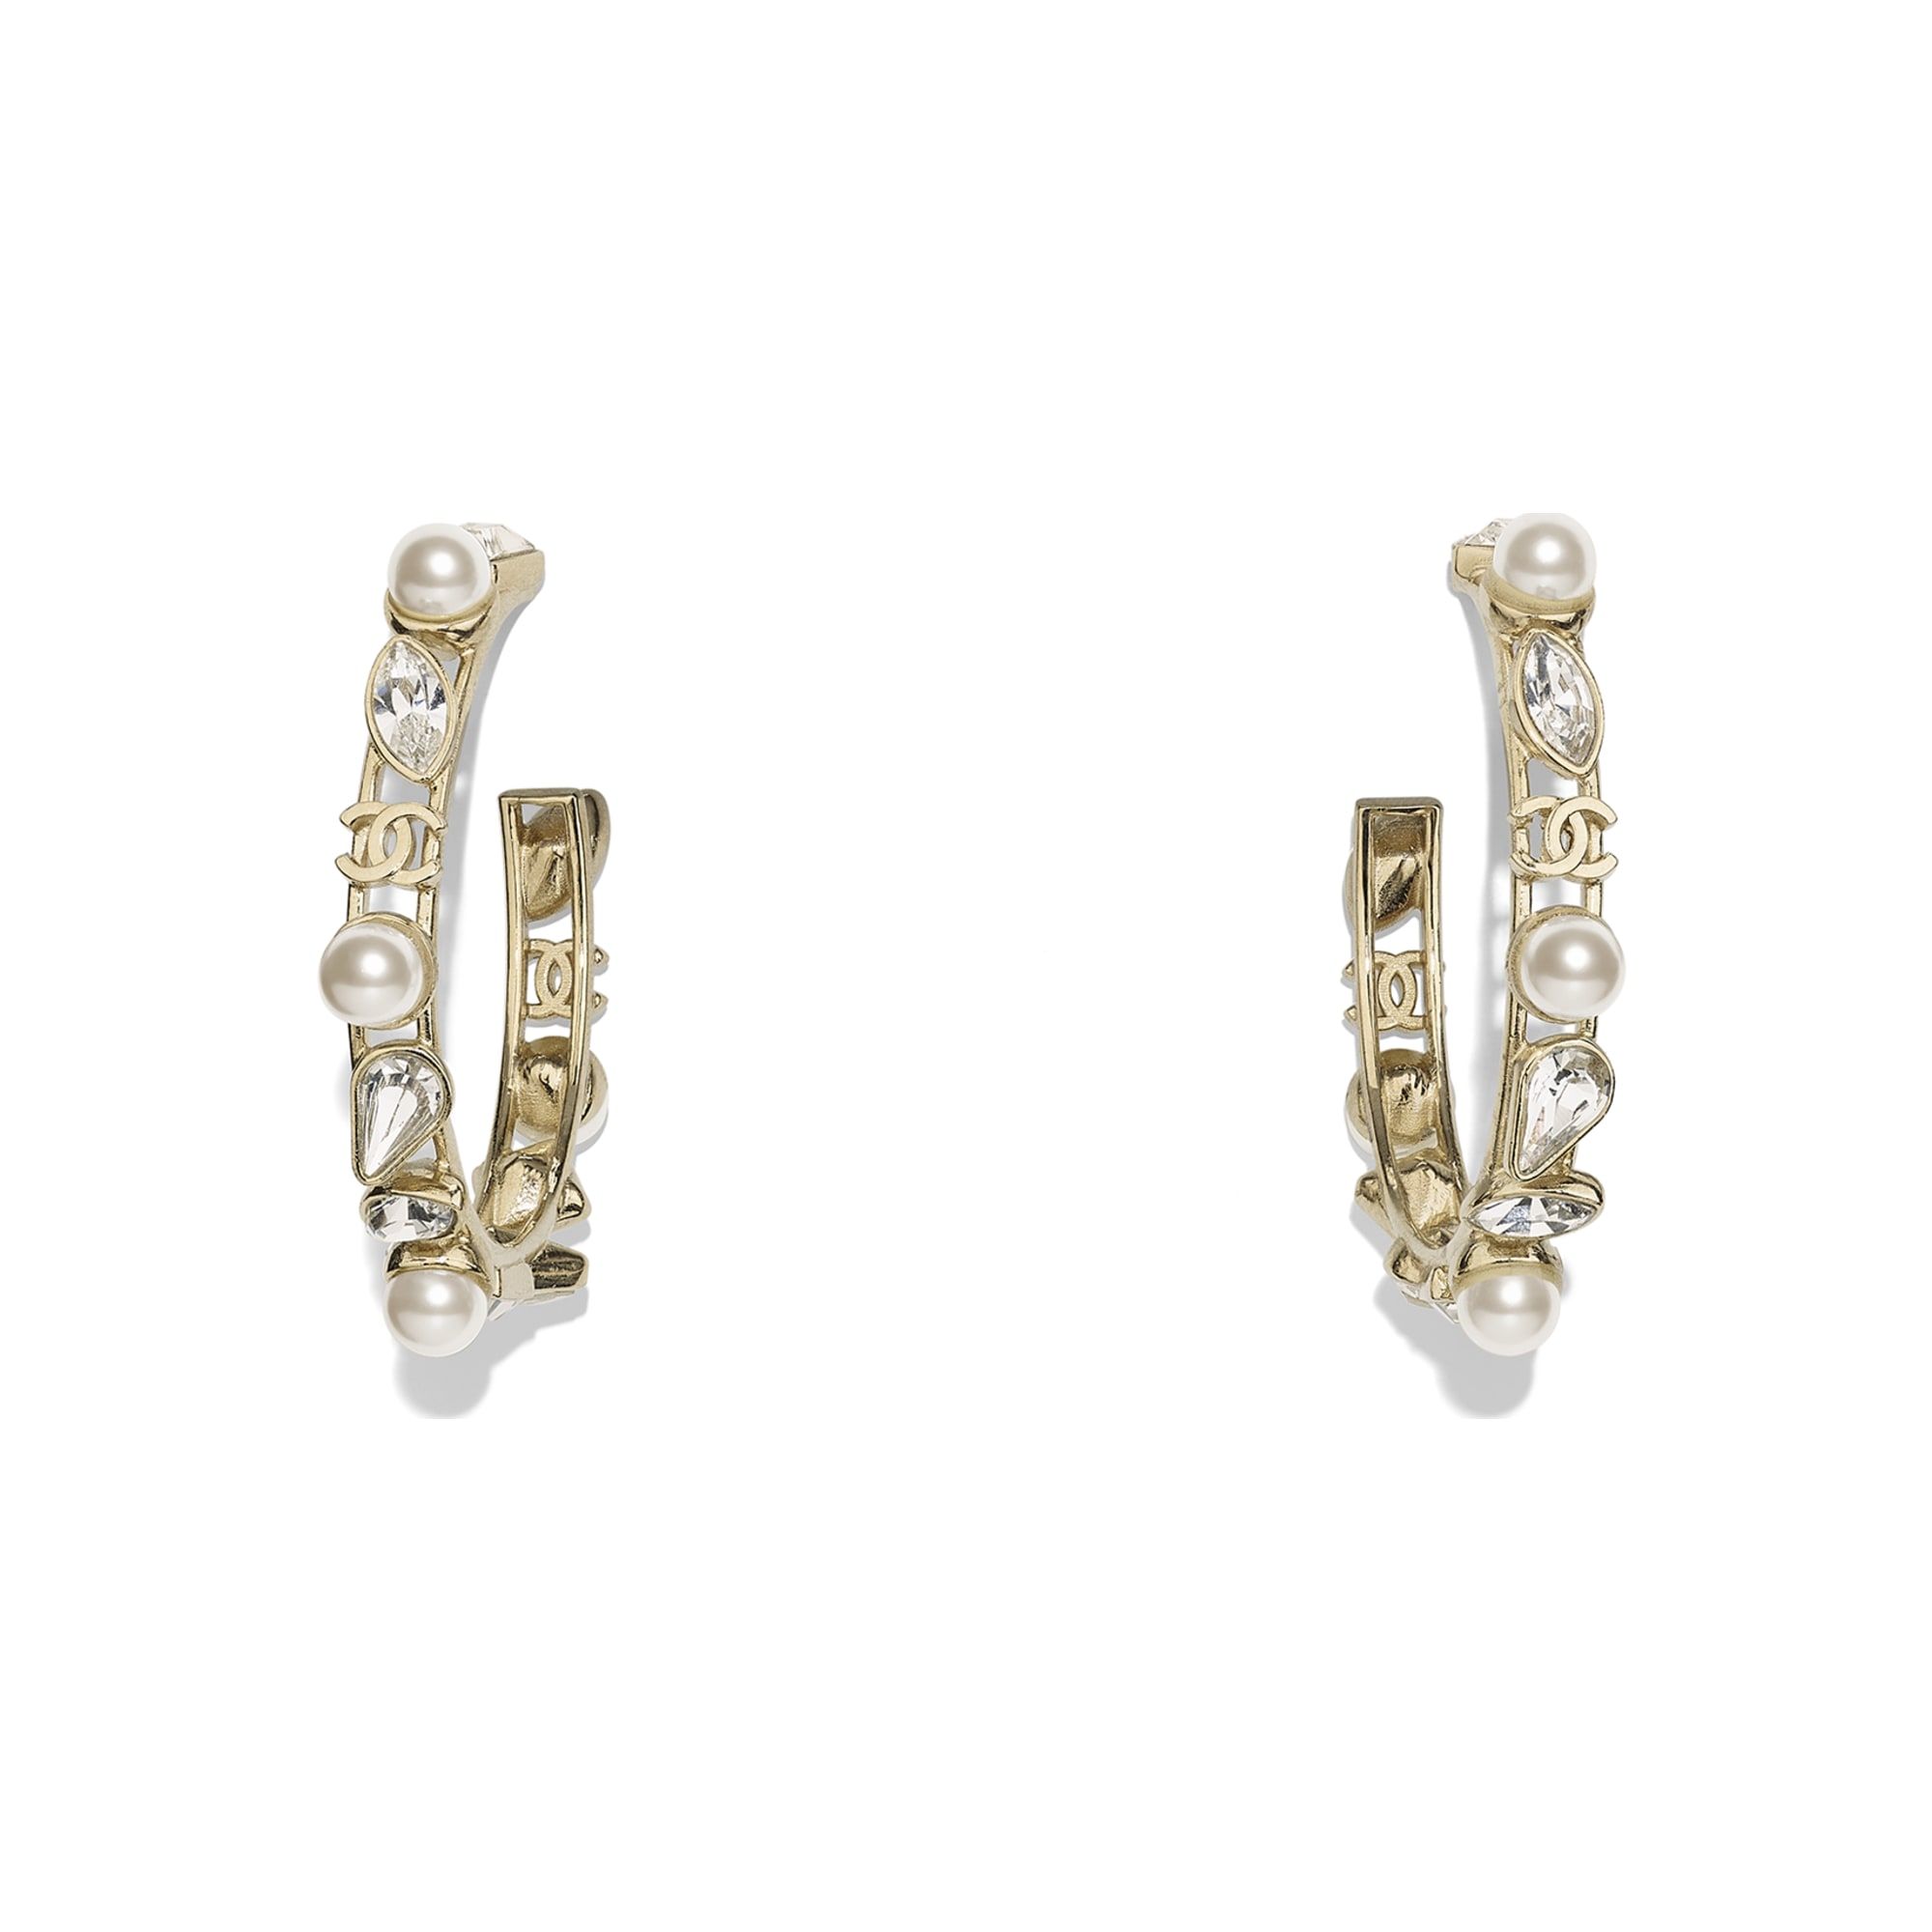 Metal, Glass Pearls   Strass Gold, Pearly White   Crystal Earrings | CHANEL | Chanel, Inc. (US)